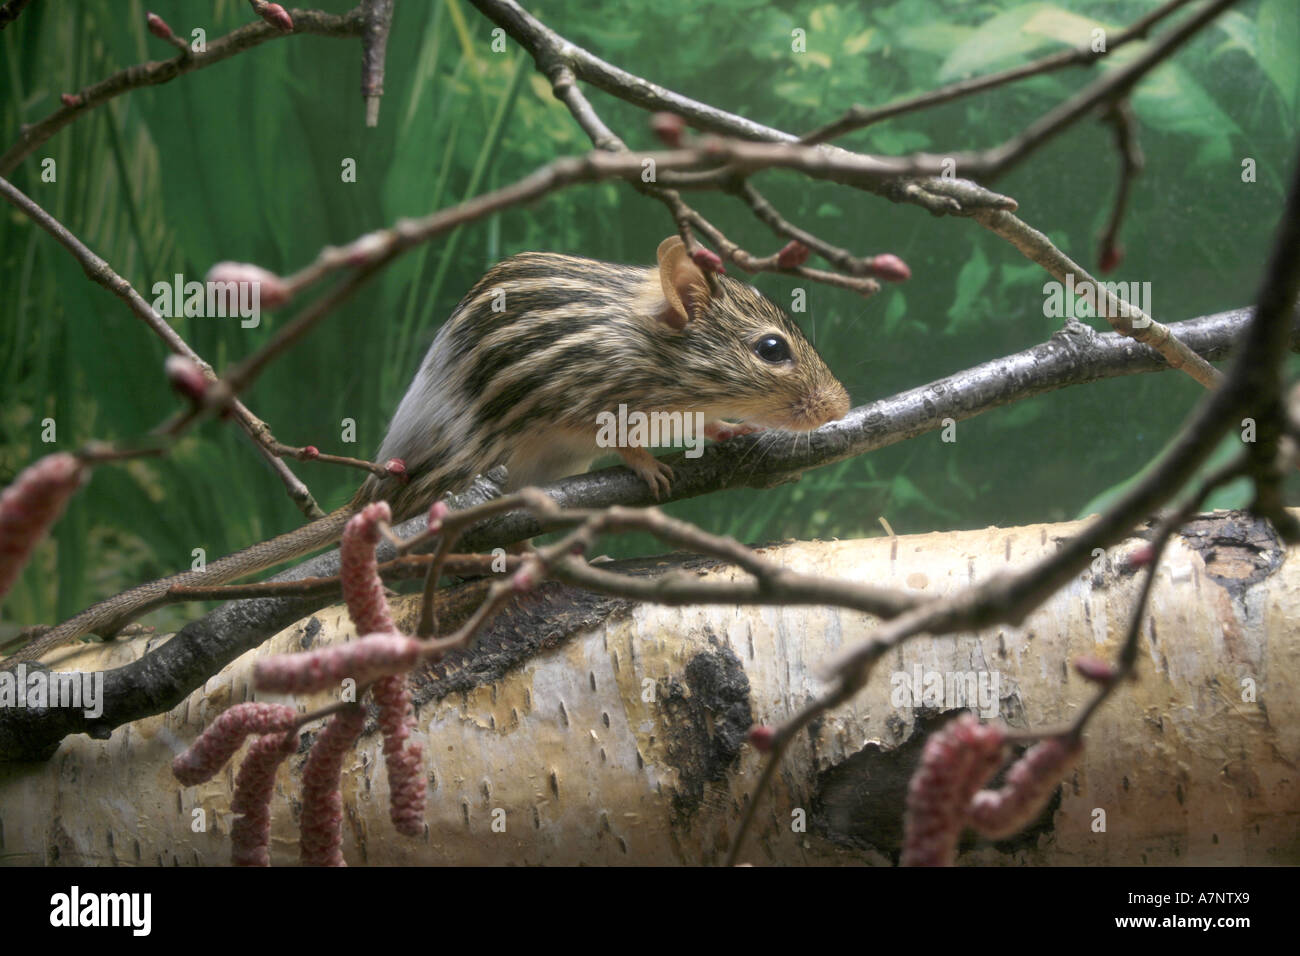 Stripped gras mouse (Lemniscomys barbarus), climbing on branch Stock Photo